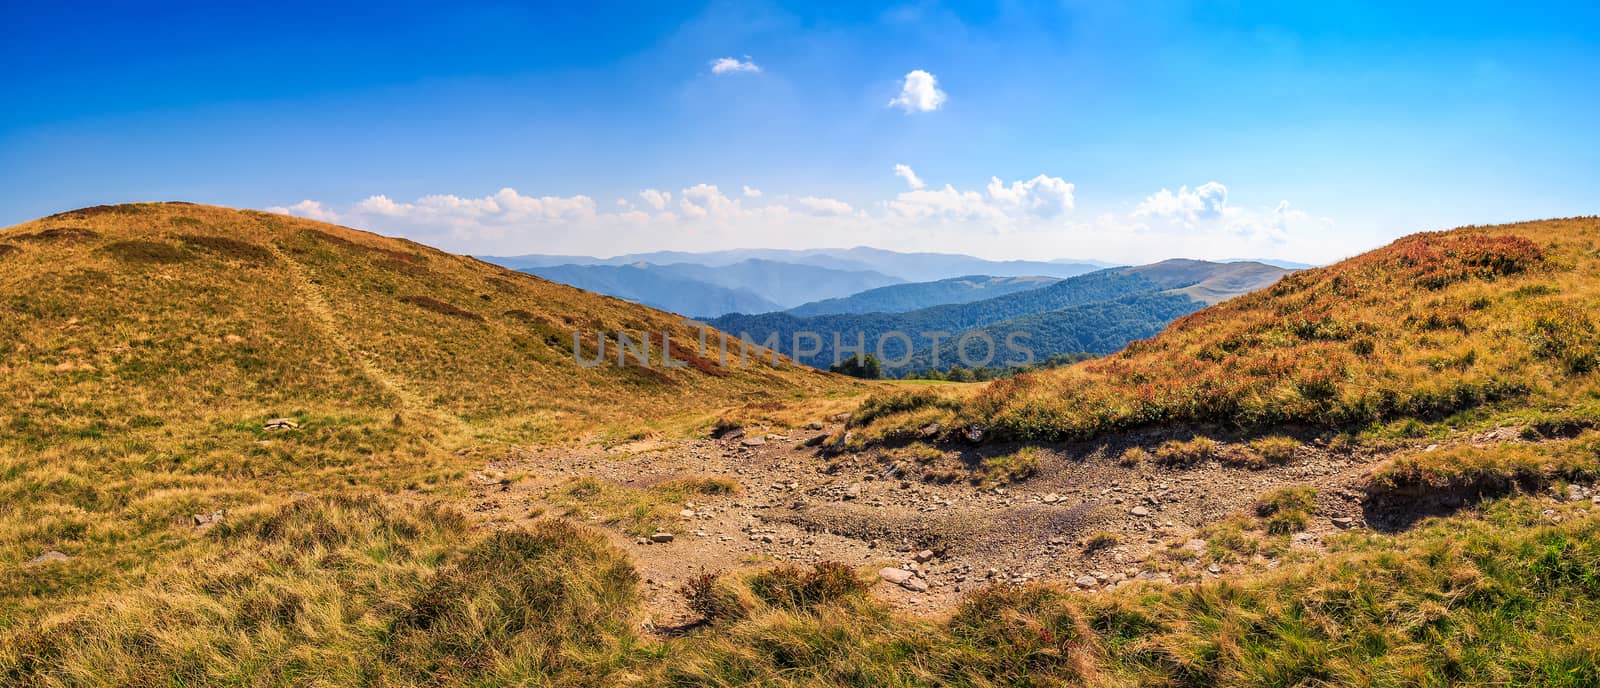 hillside panorama in mountains with path uphill by Pellinni